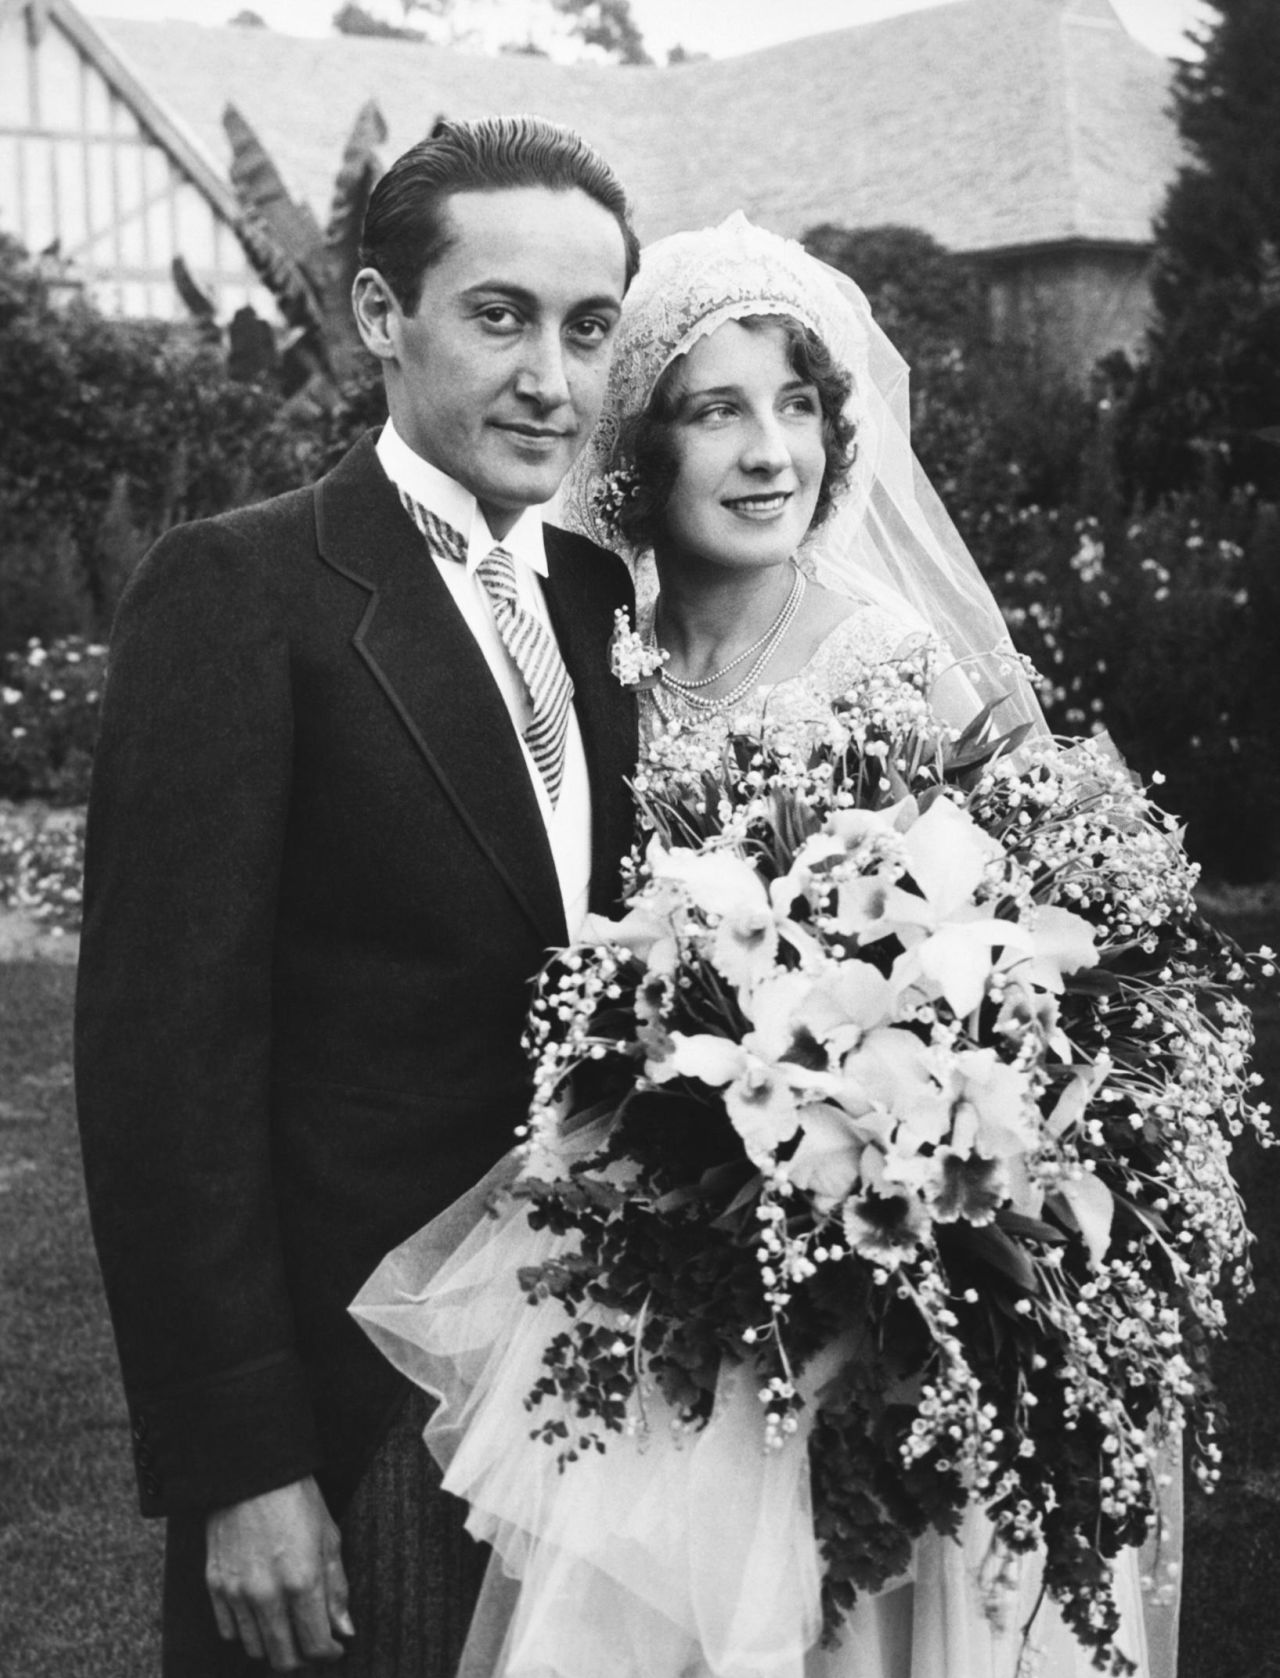 Academy Award-winning actress Norma Shearer and movie producer Irving Thalberg on their wedding day in 1927.